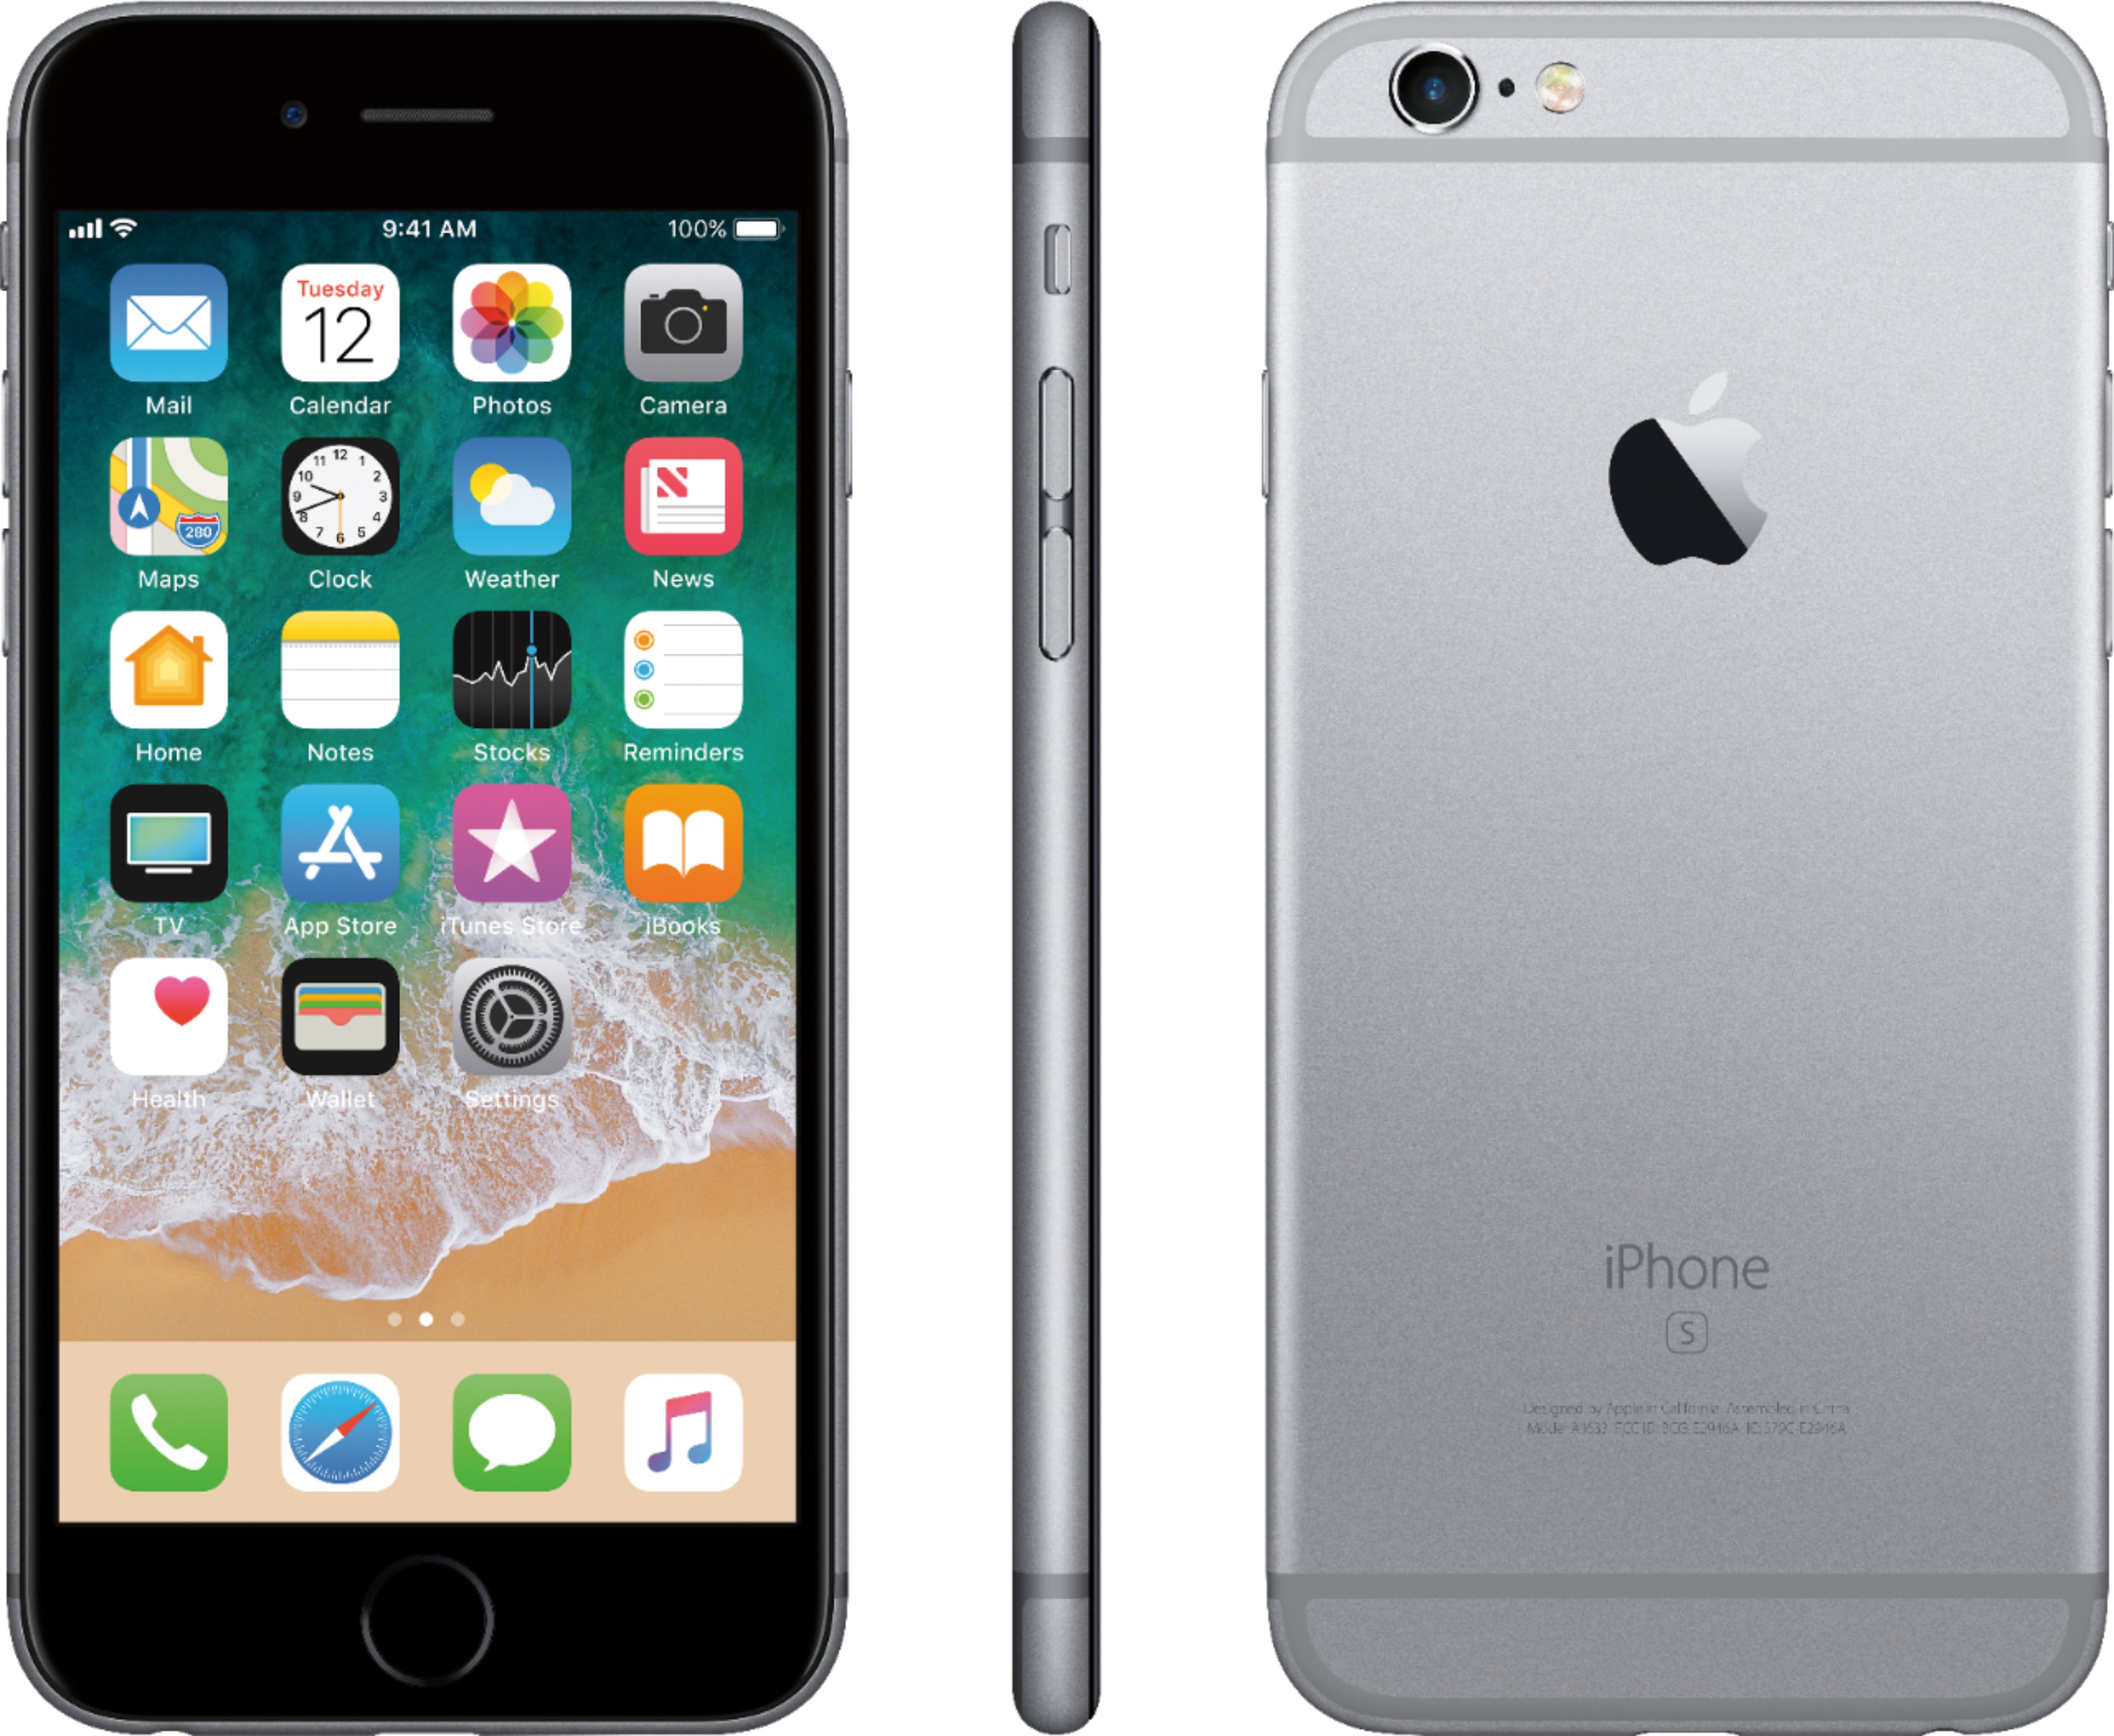 iPhone 6s and iPhone 6s Plus review roundup | iMore